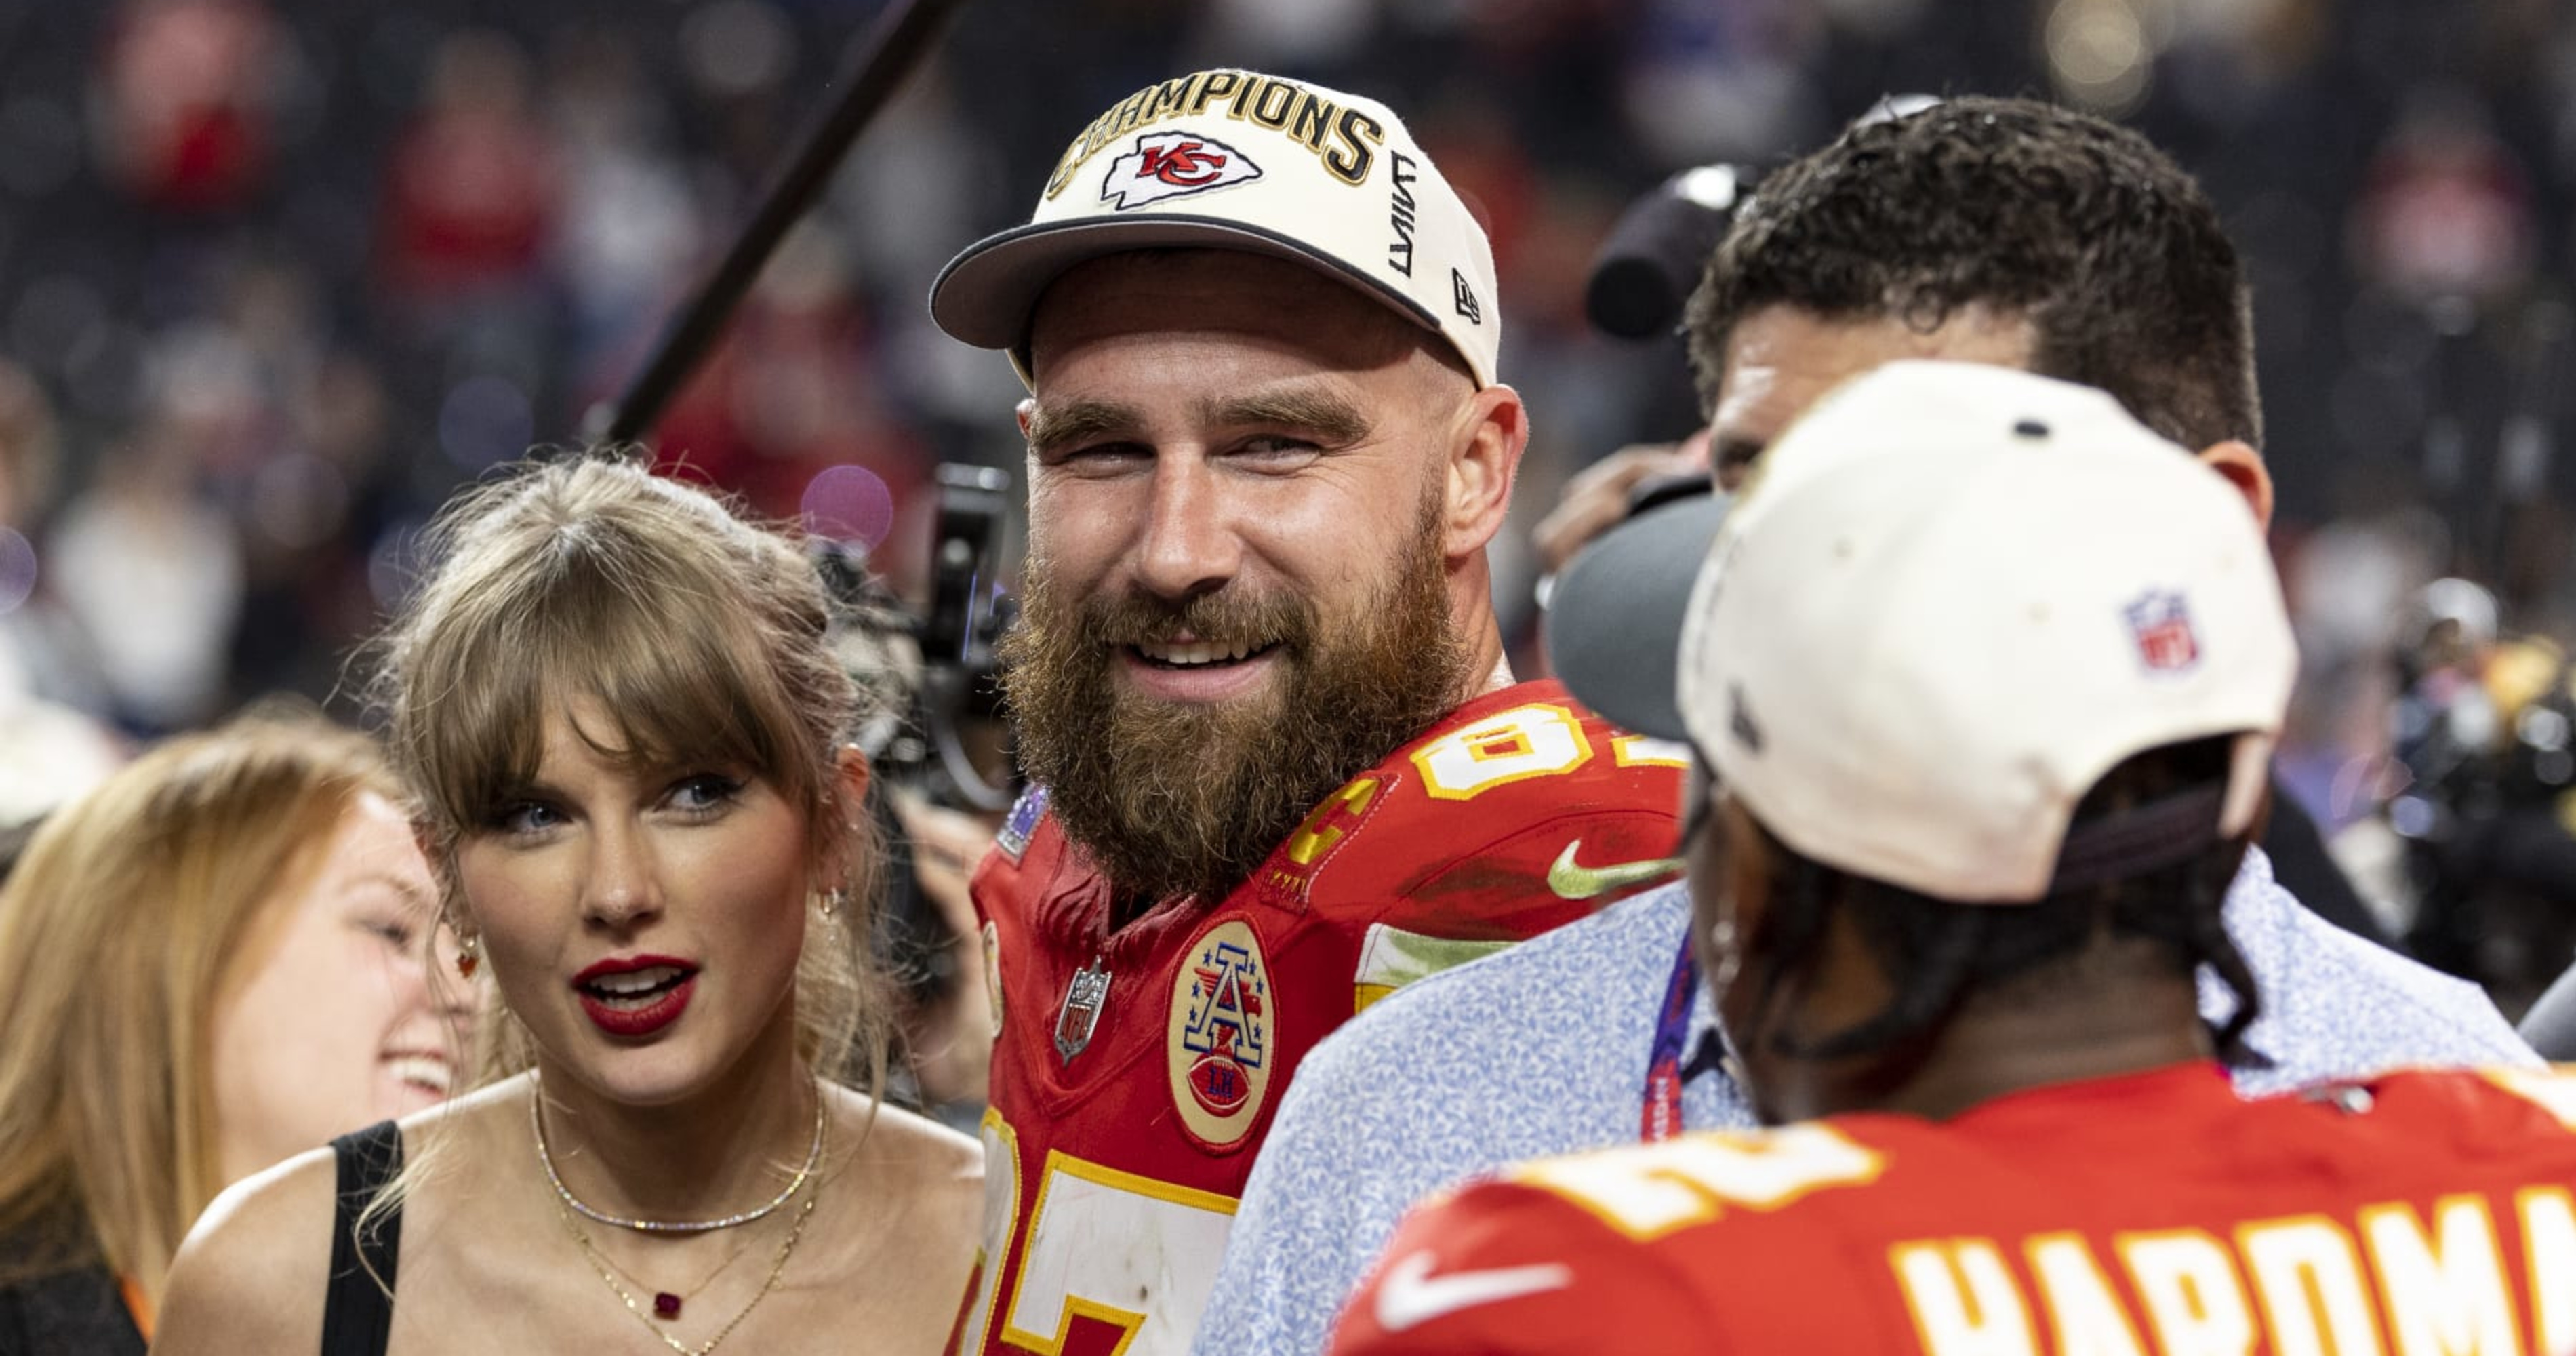 Taylor Swift Reacts to Chiefs' Super Bowl Rings, Hypes Mecole Hardman's New Contract